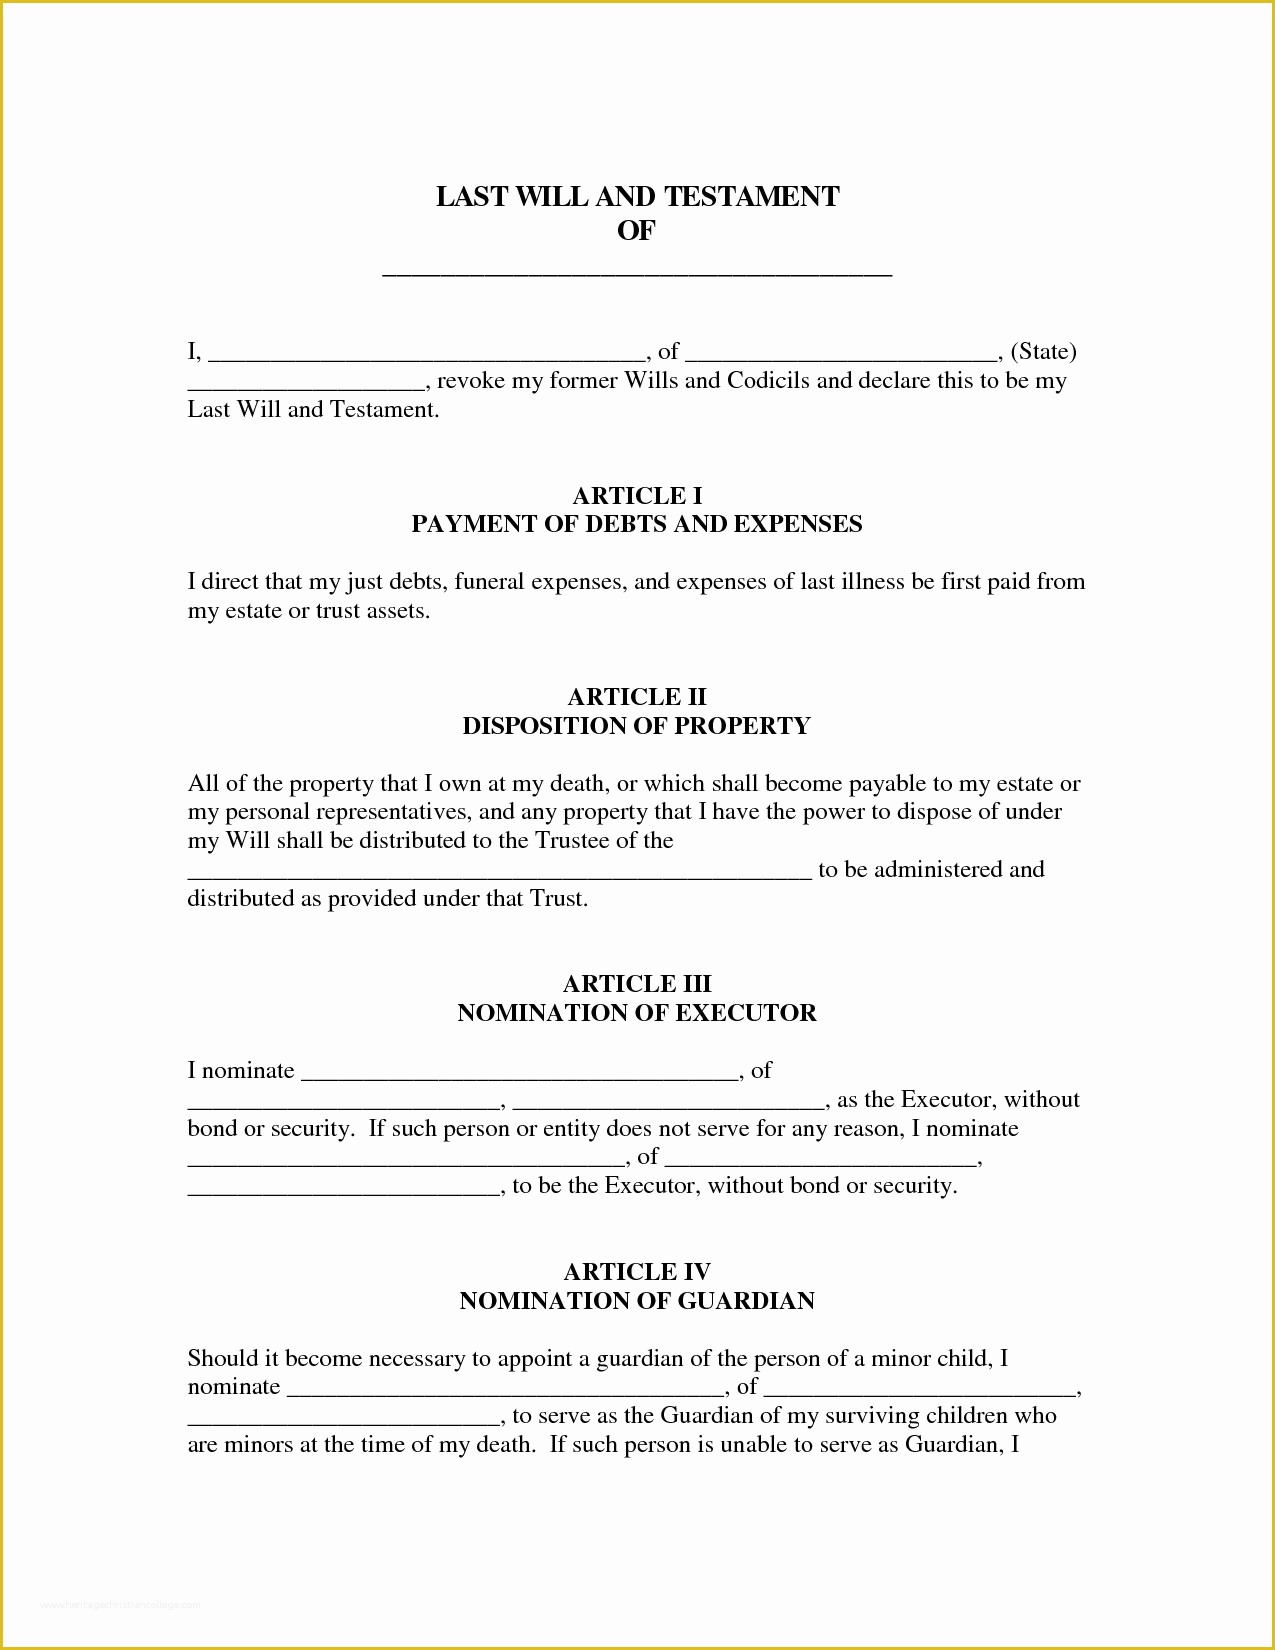 Last Will and Testament Texas Free Template Of Last Will and Testament Template Free Printable Documents